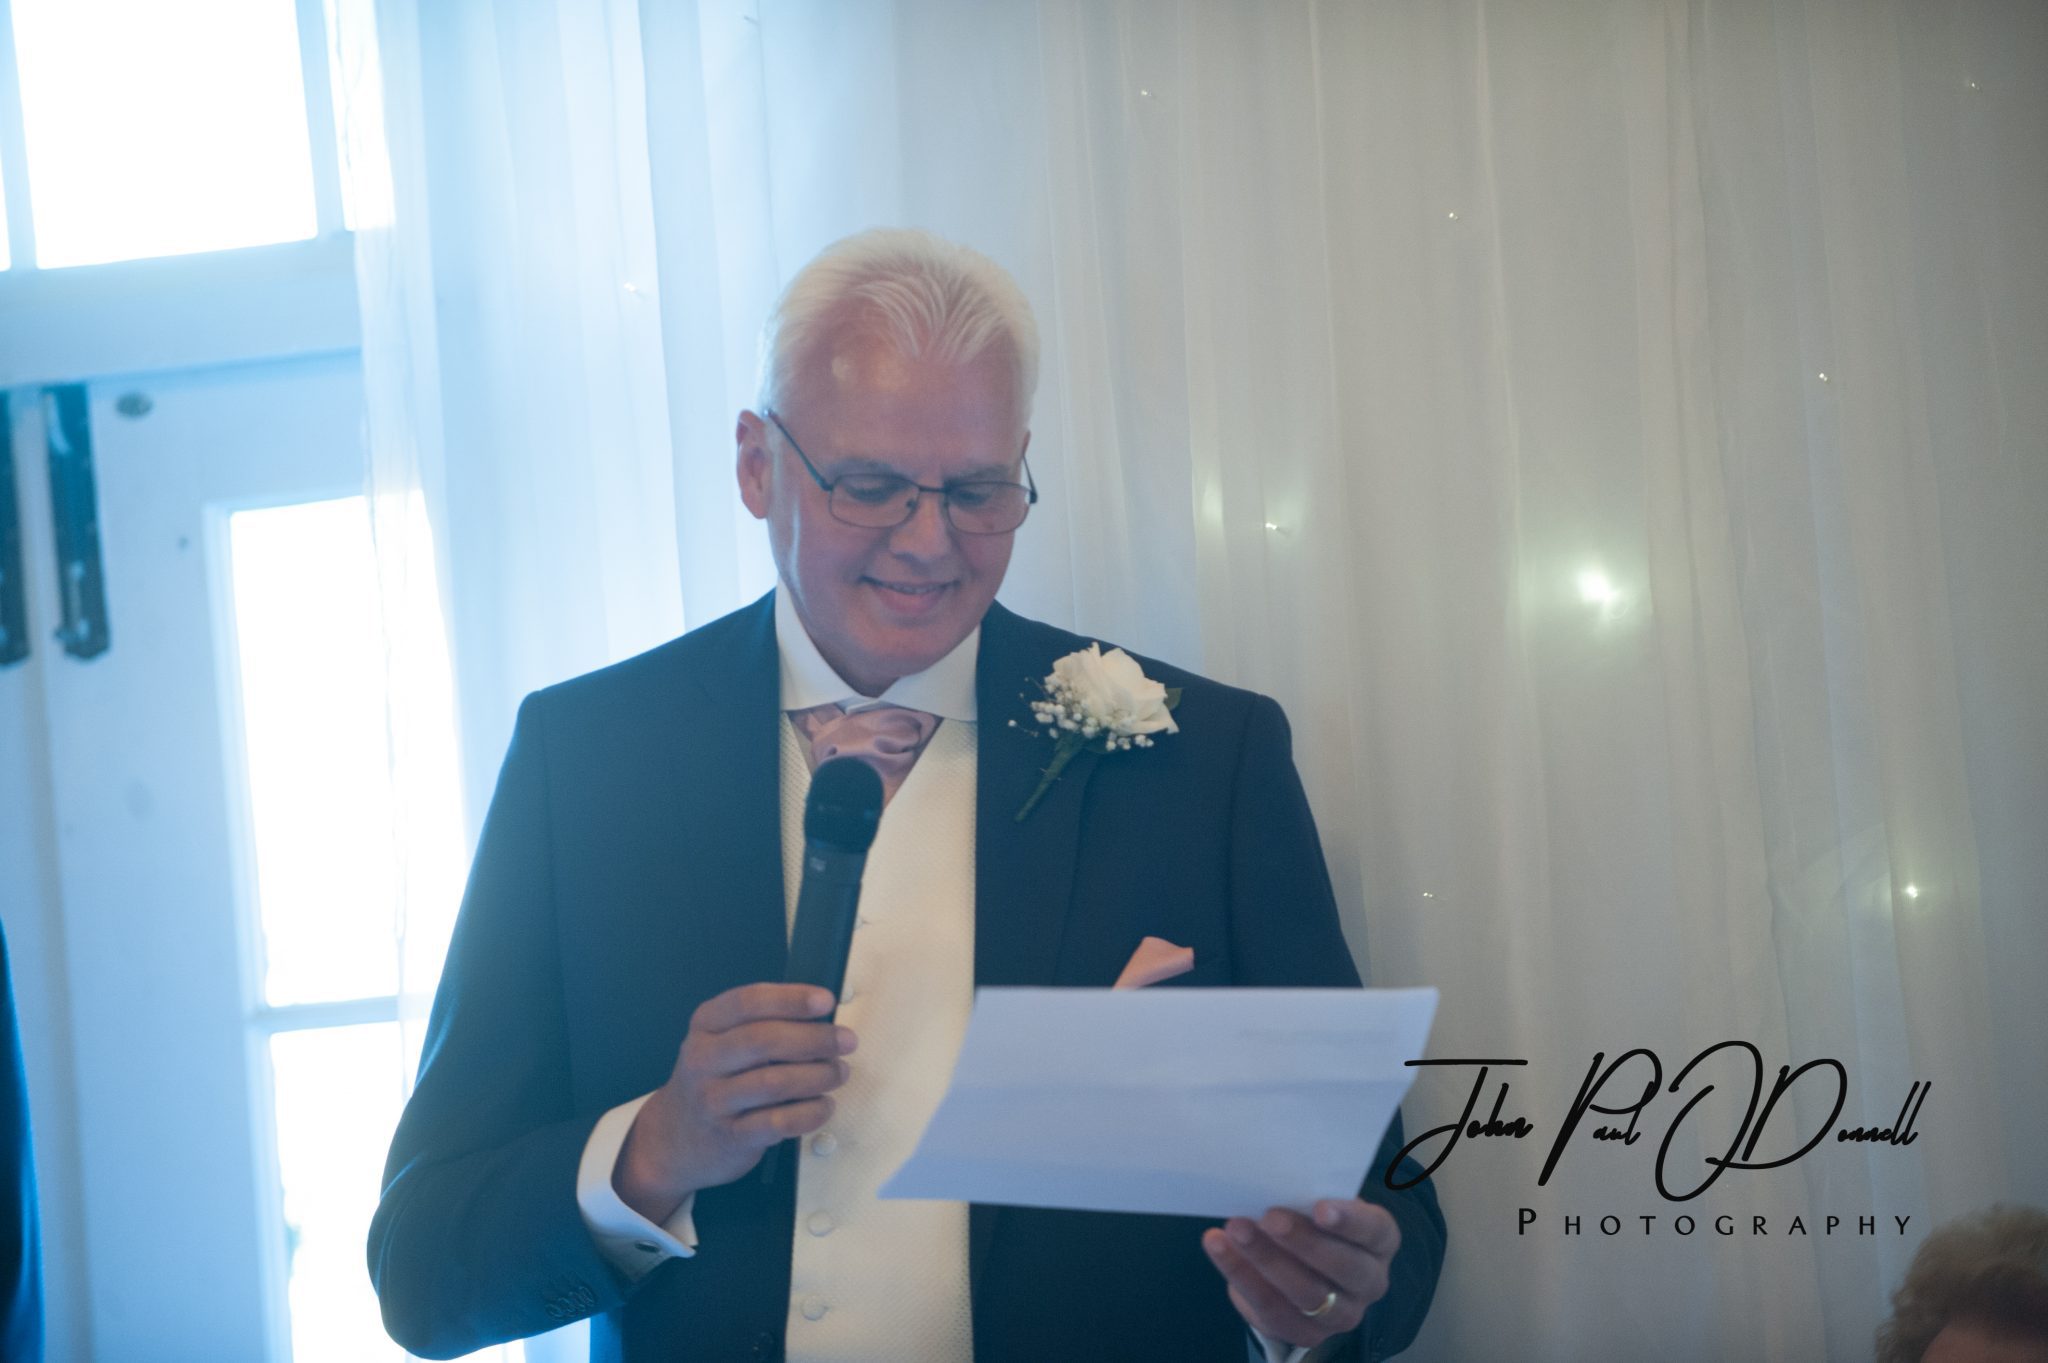 Julie and Eddies wedding at Forty Hall Enfield